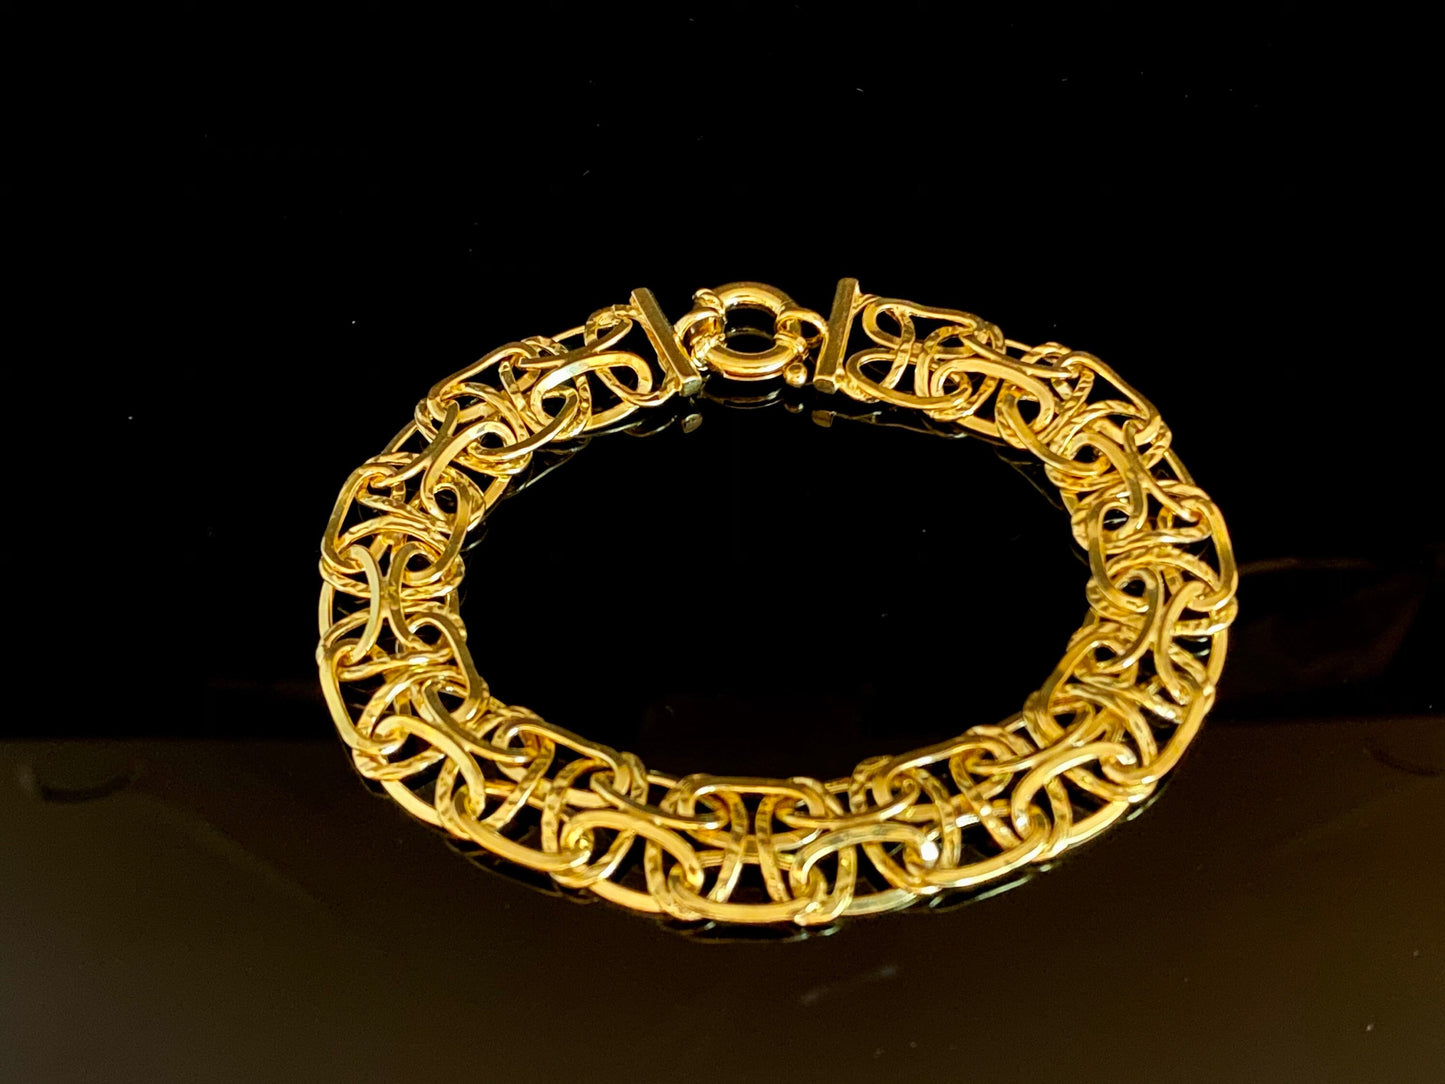 Yellow Gold Over Sterling Silver Wide Woven Lace Link Bracelet